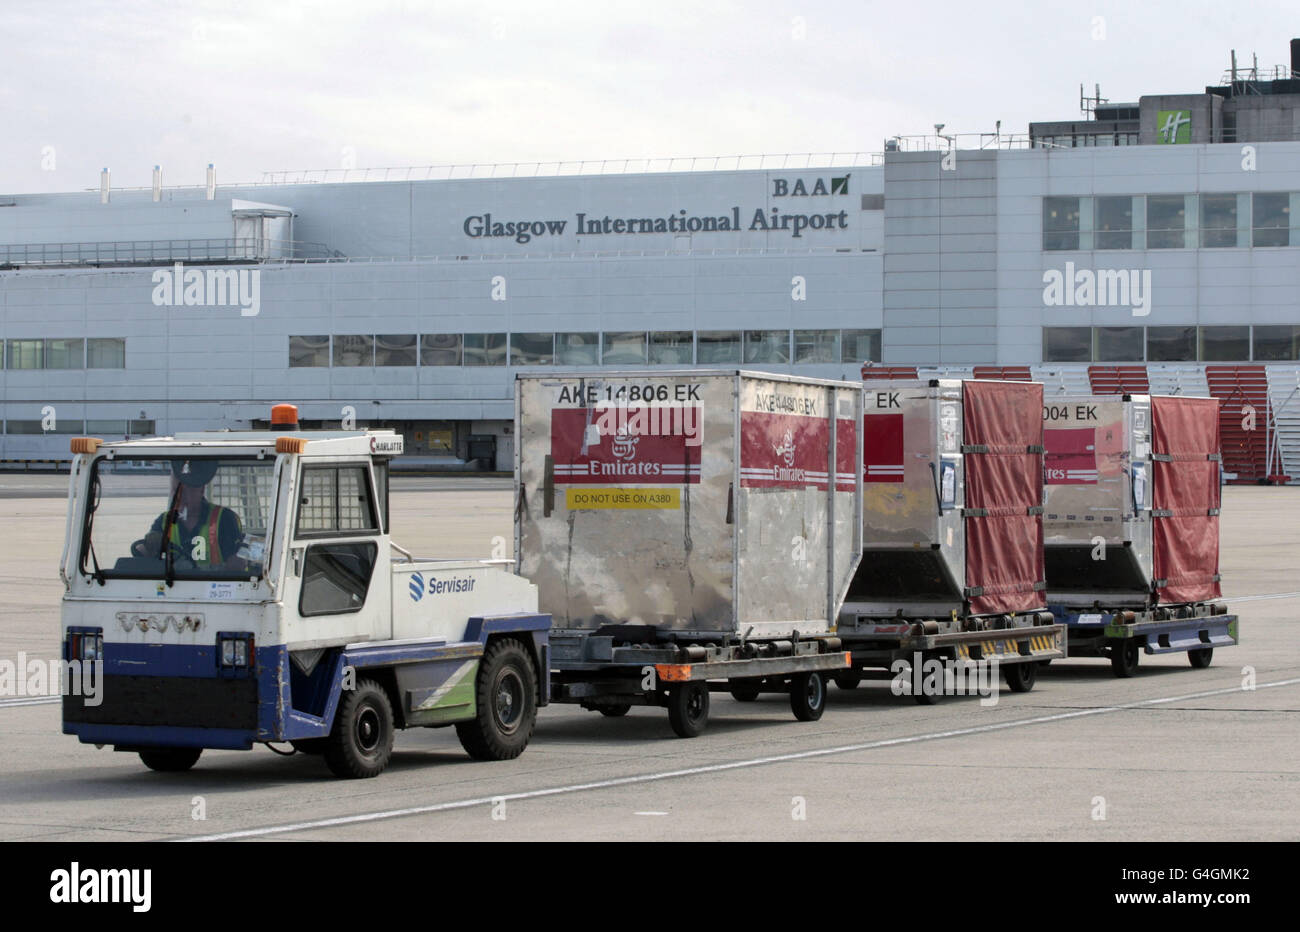 Glasgow International Airport Feature. Air side view of Glasgow airport Stock Photo